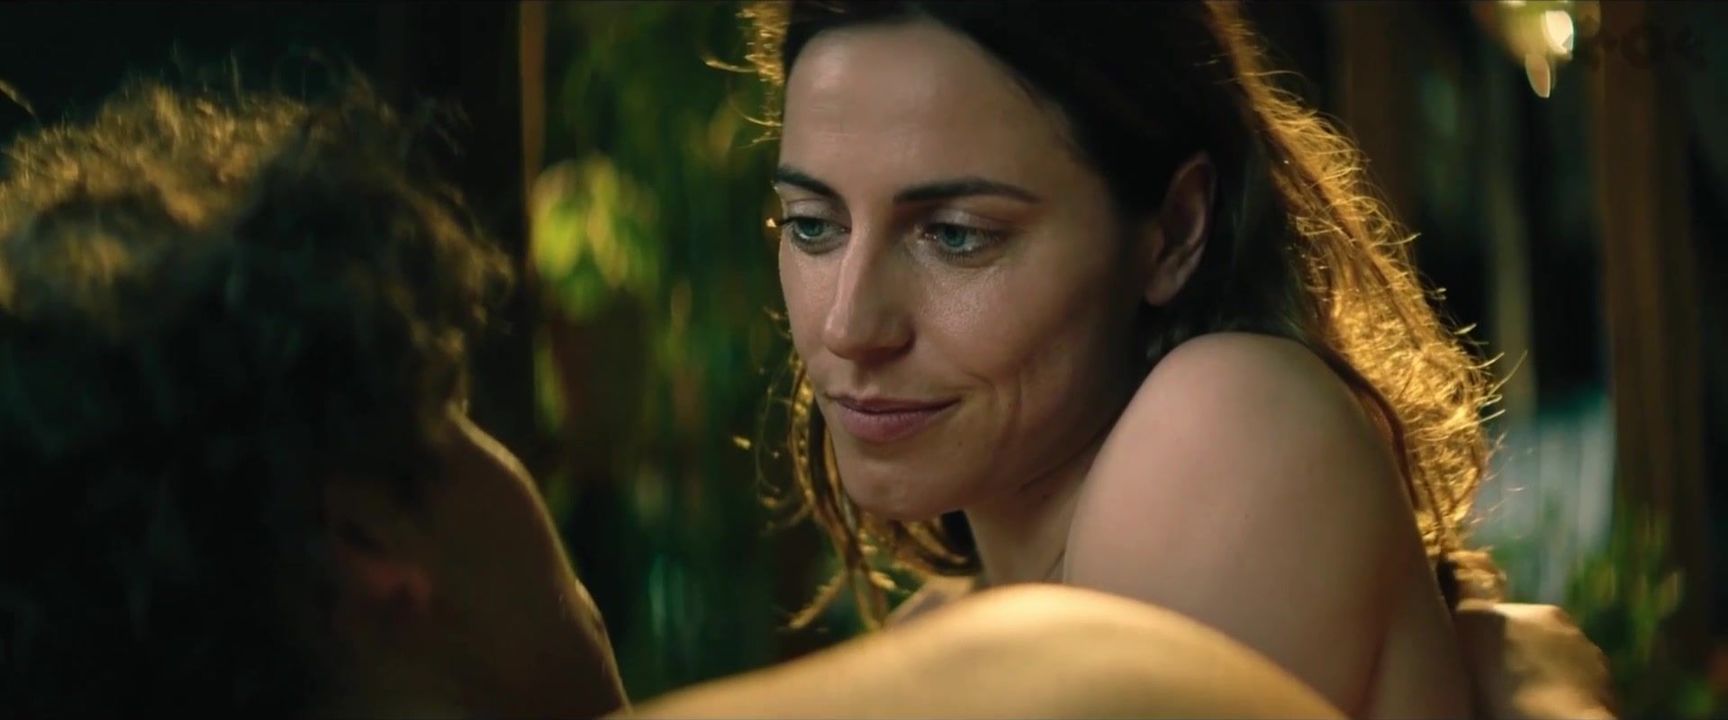 Tits antje traue Free Antje